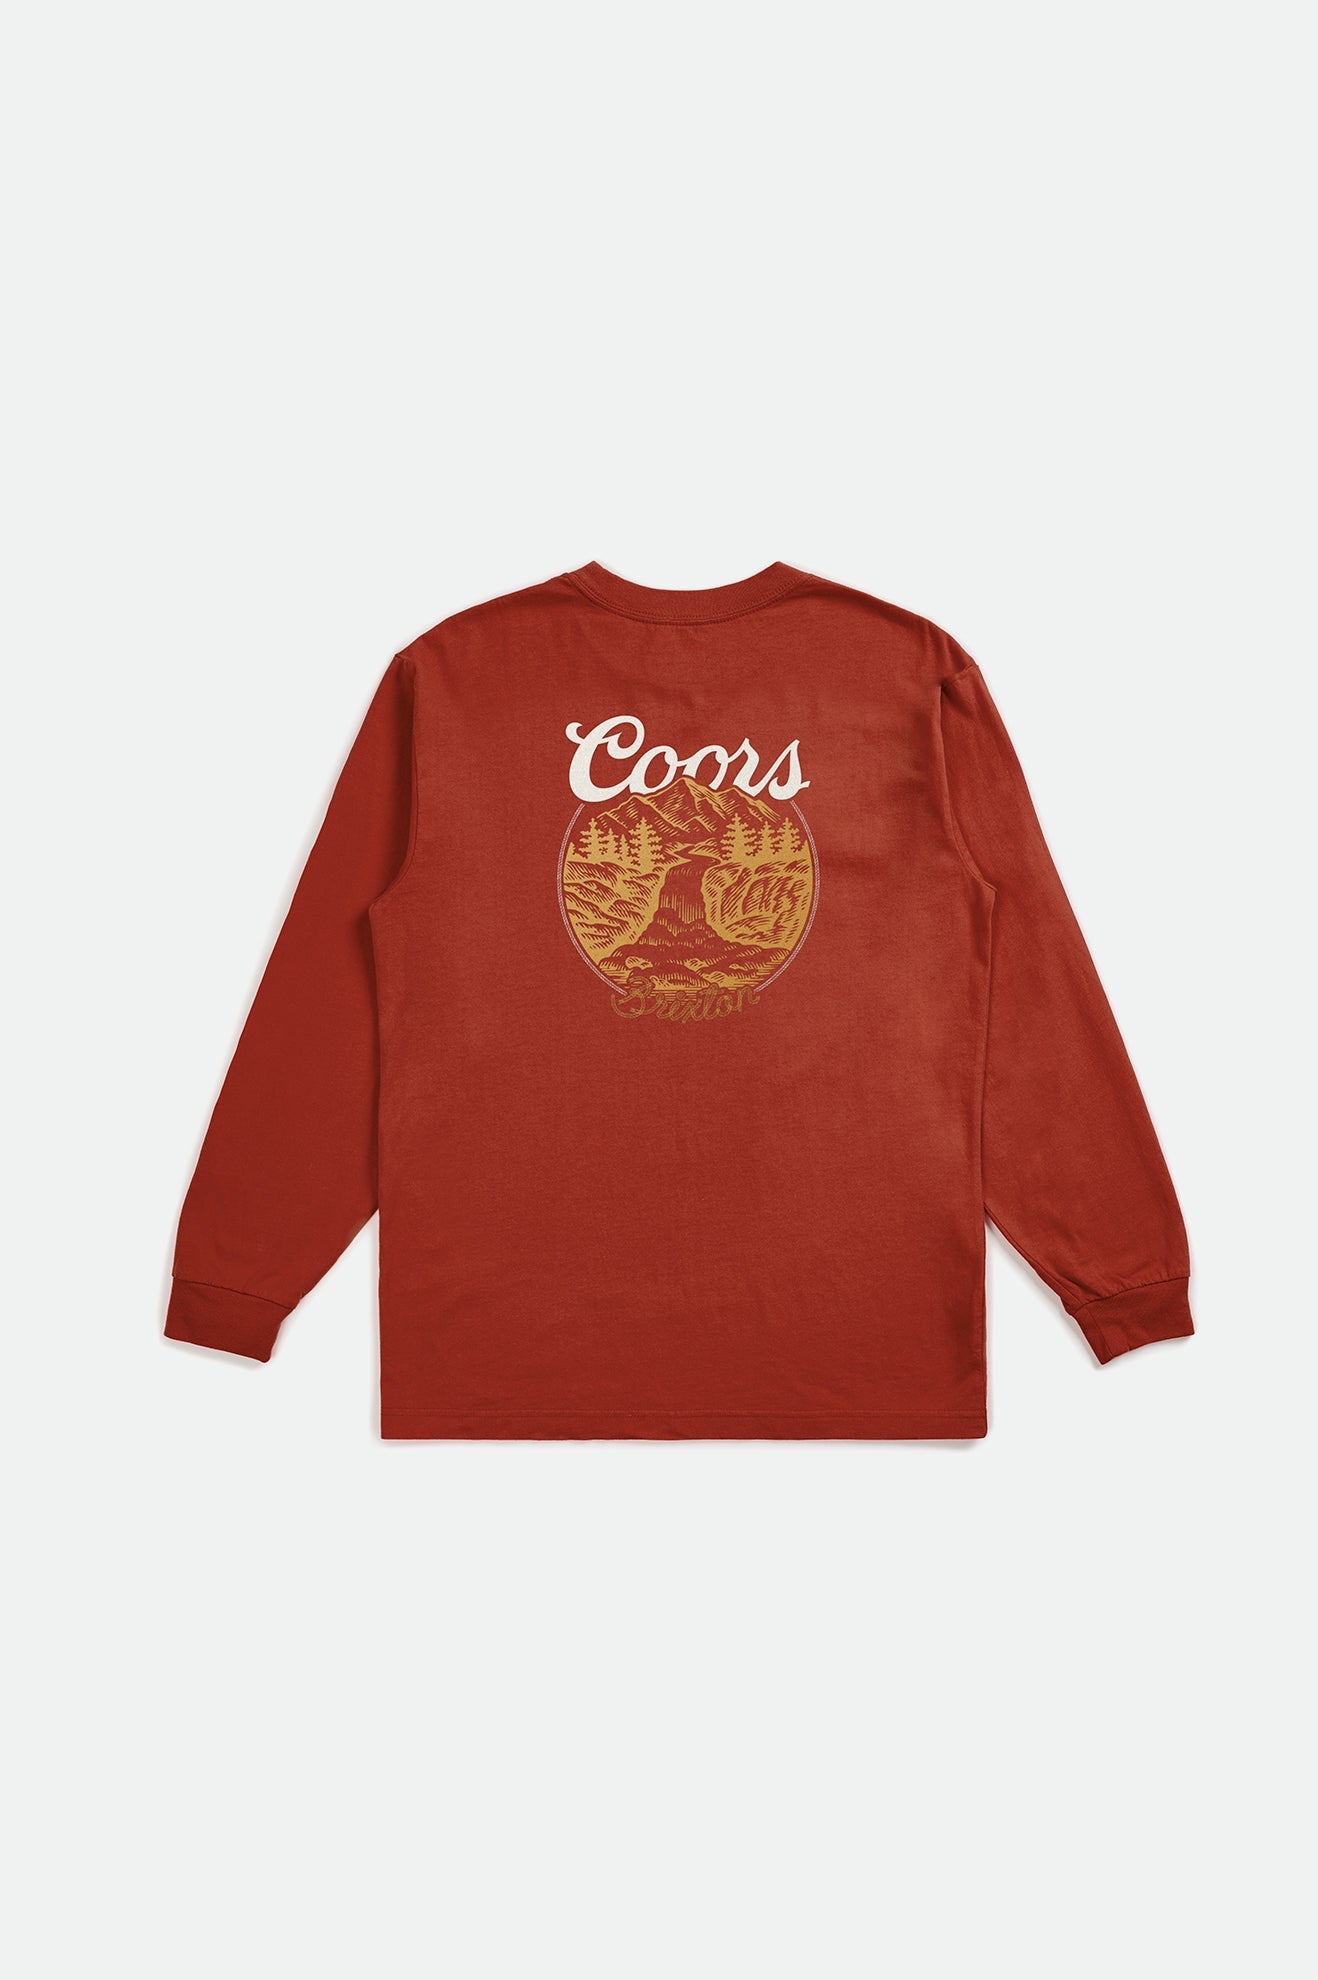 Coors Rocky L/S Standard Tee - Banquet Red